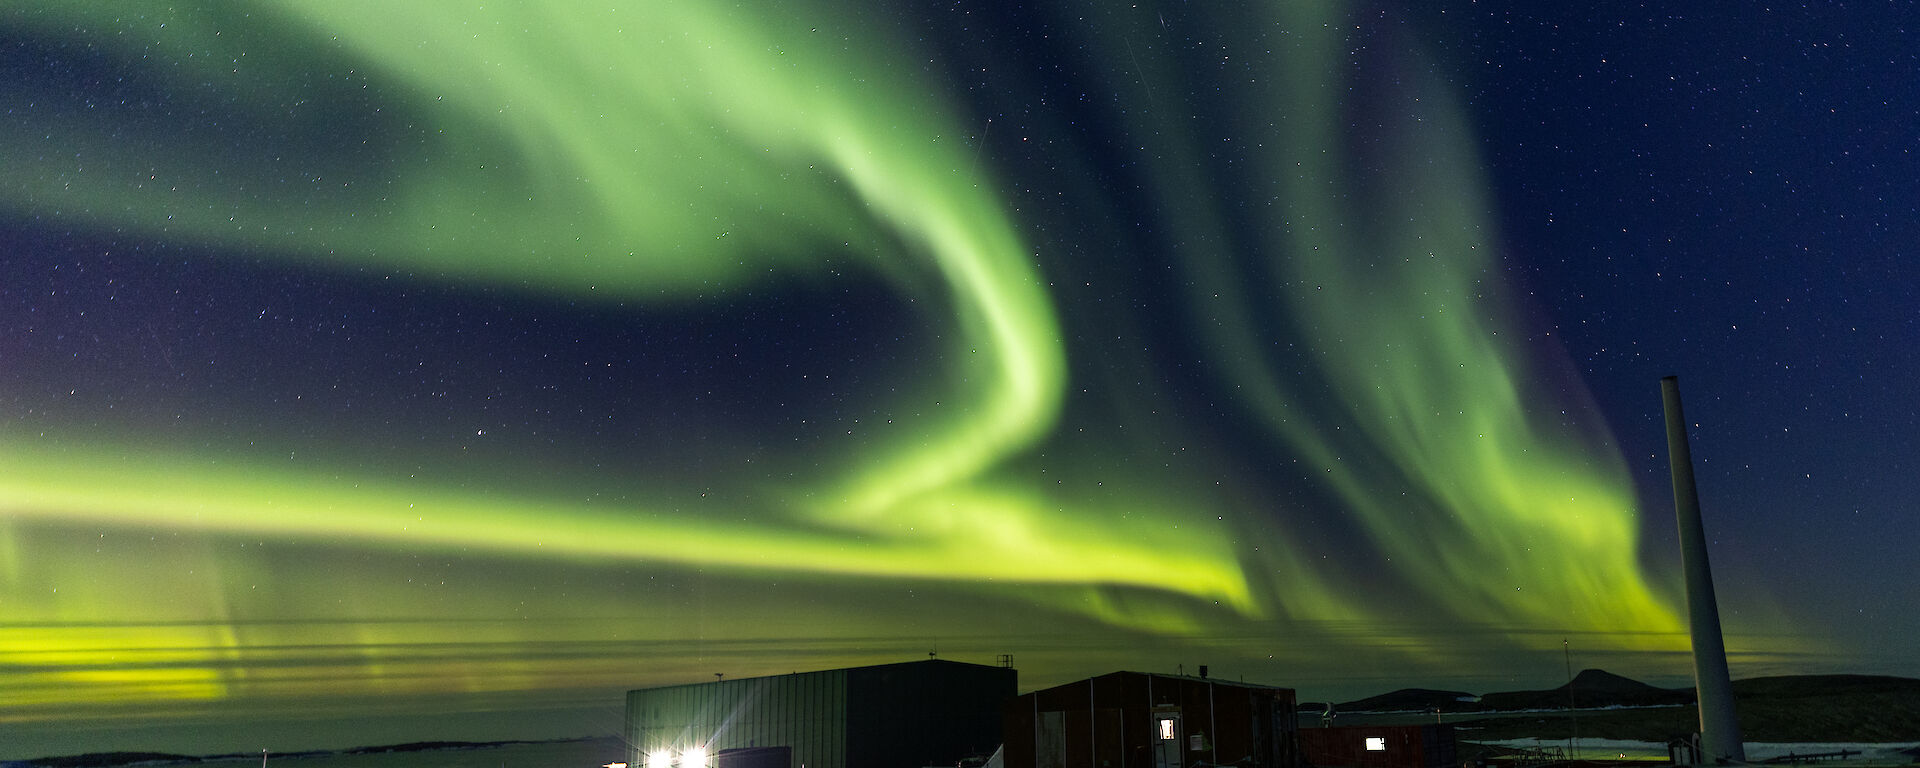 A green aurora lights up the sky over the station's buildings